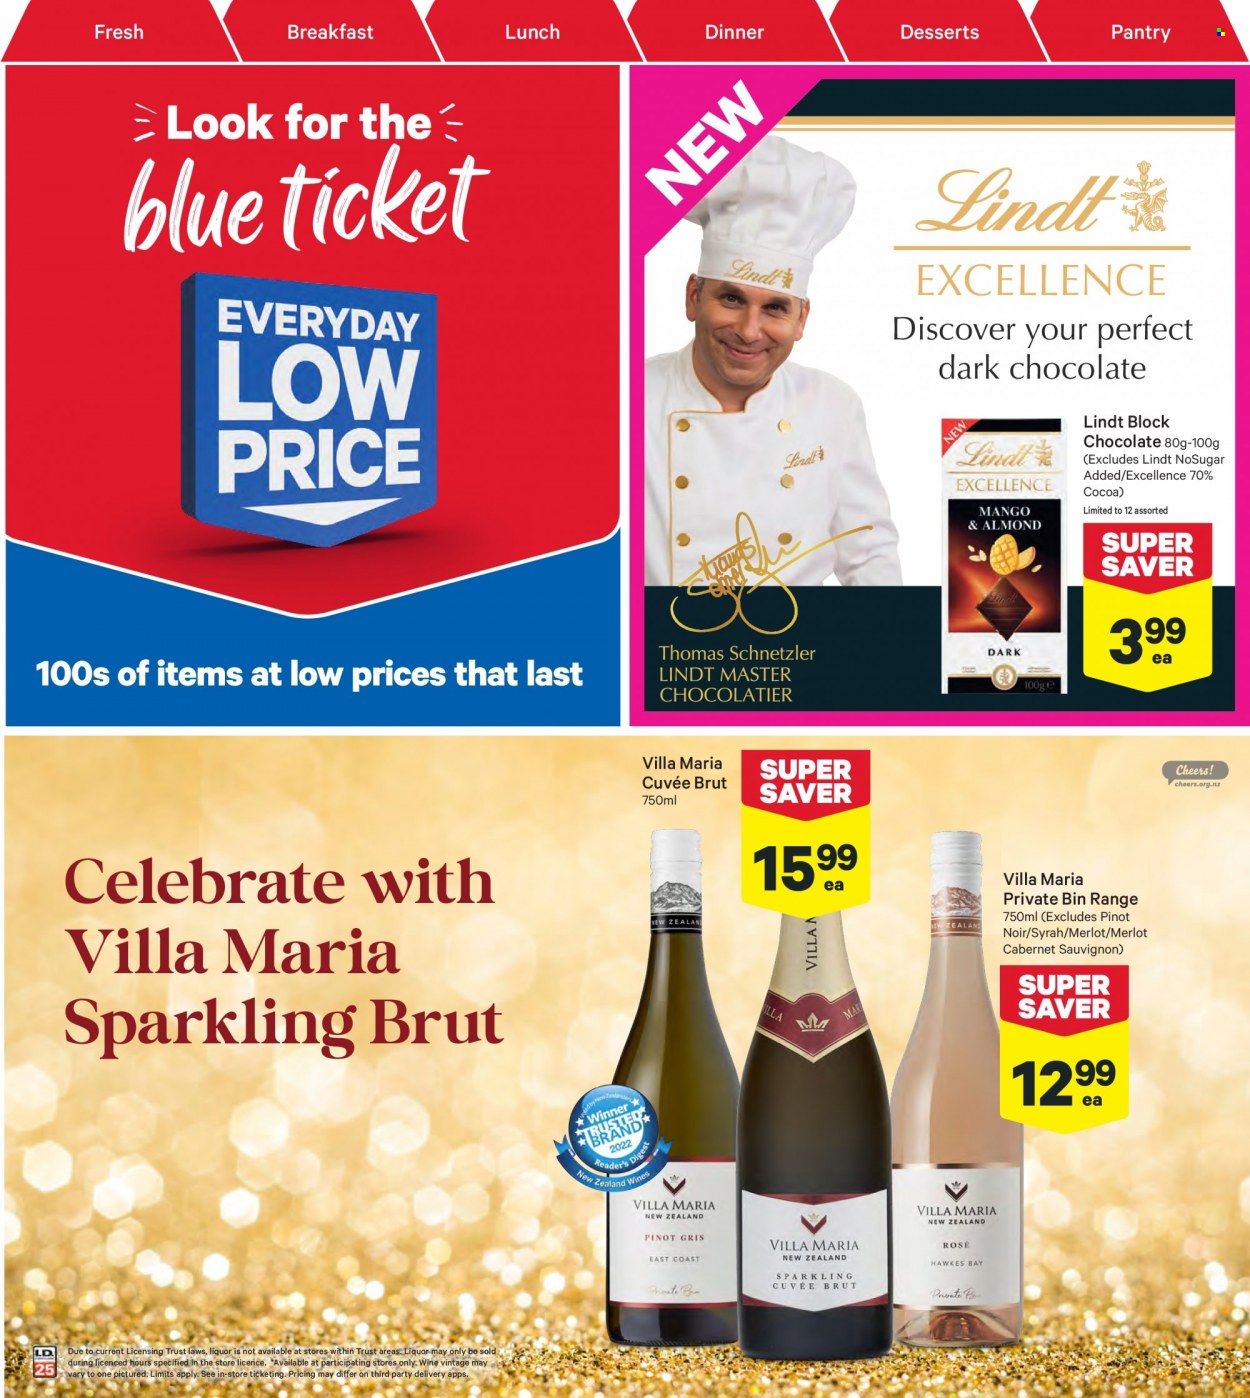 thumbnail - New World mailer - 27.03.2023 - 02.04.2023 - Sales products - chocolate, Lindt, dark chocolate, Cabernet Sauvignon, red wine, sparkling wine, wine, Merlot, Pinot Noir, Cuvée, Syrah, Brut, bin. Page 23.